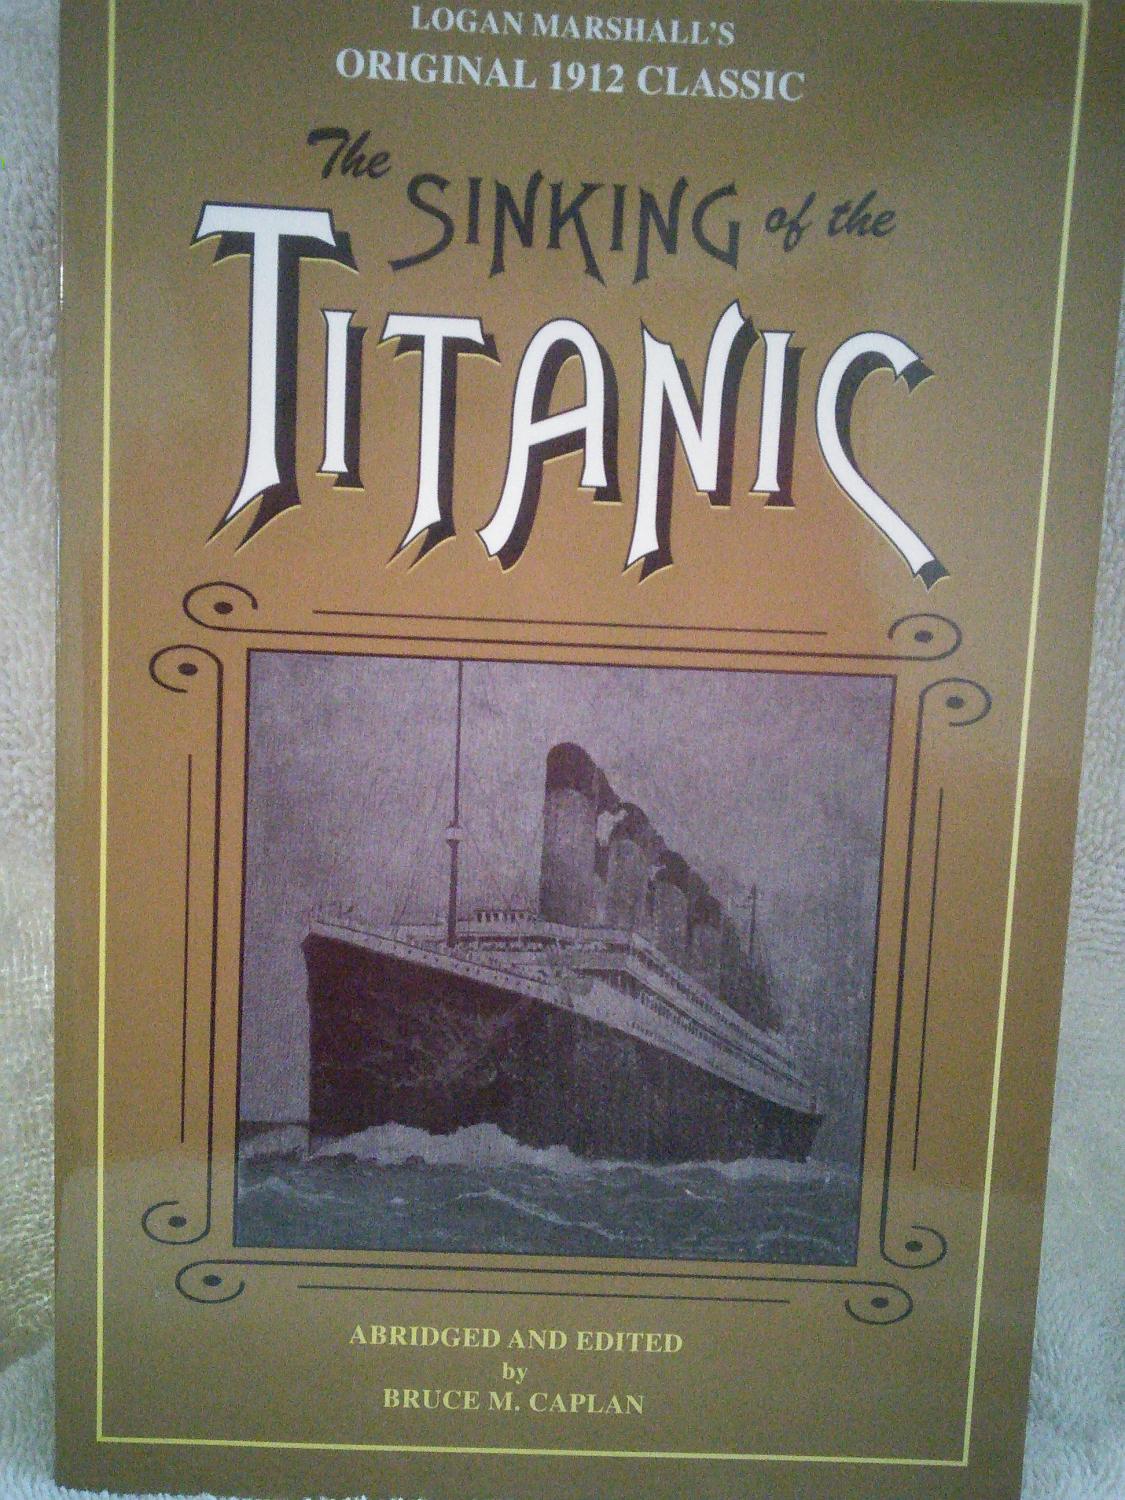 The Sinking of the Titanic - Edited by Bruce M. Caplan